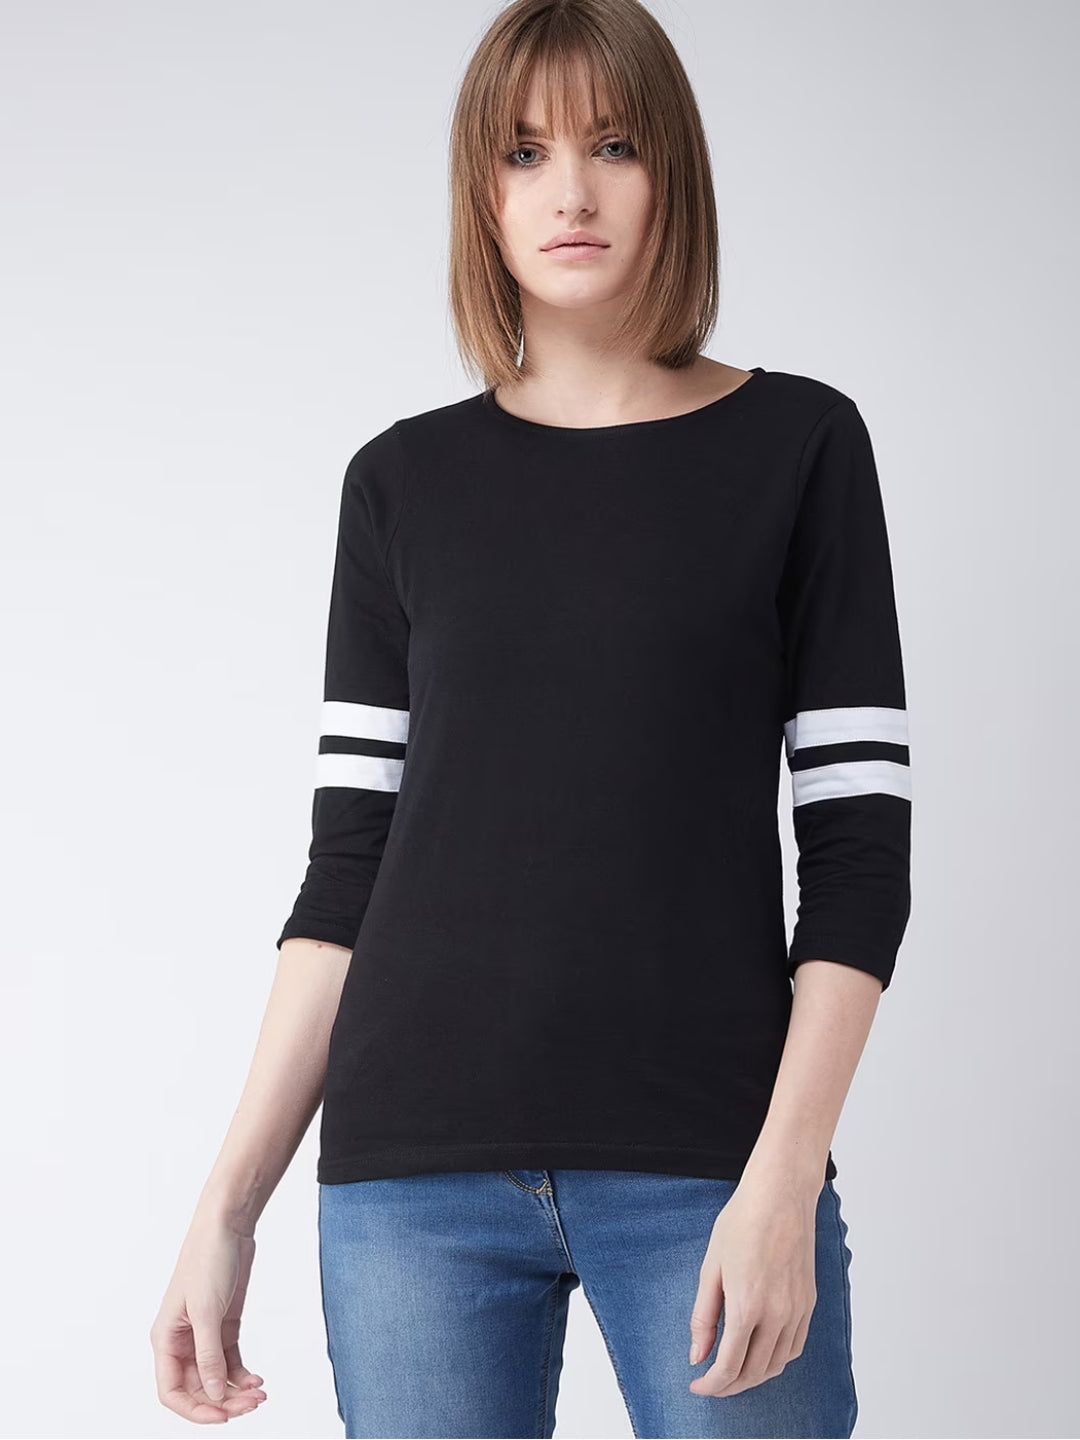 Black Round Neck 3/4 Sleeves Solid Basic Top